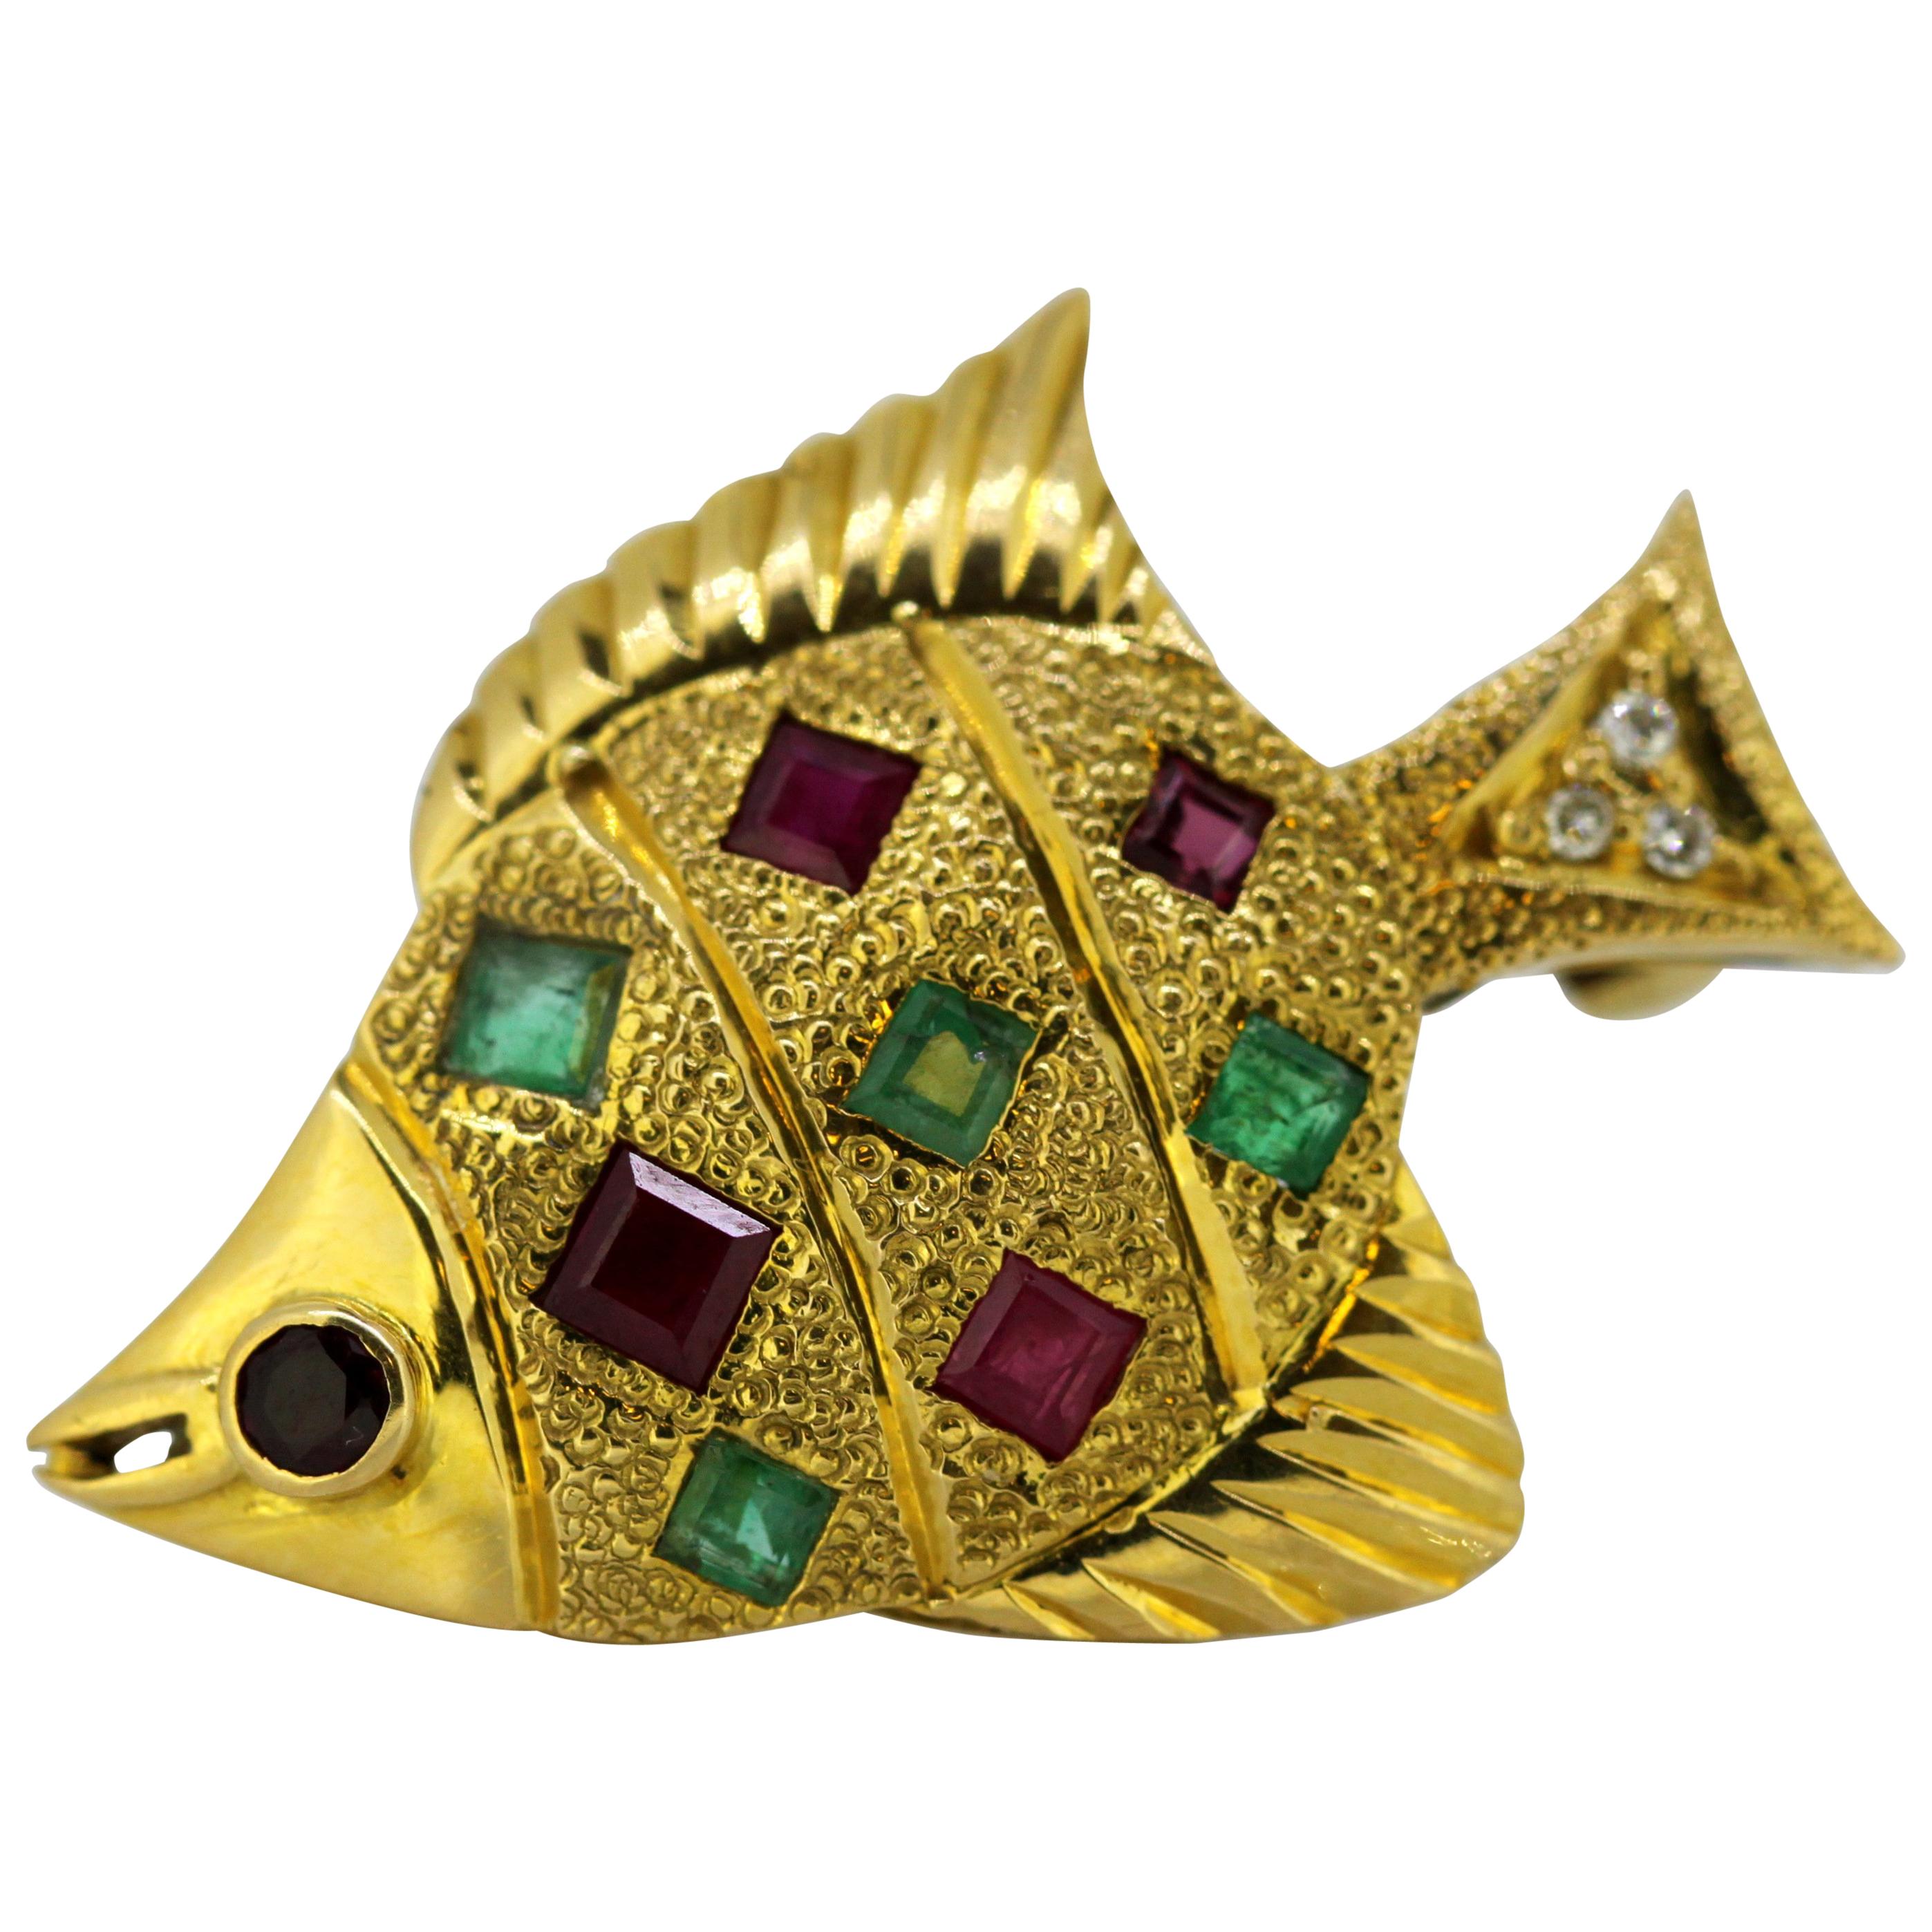 Vintage 18 Karat Gold Brooch/Pendant in the Shape of a Fish, circa 1970s